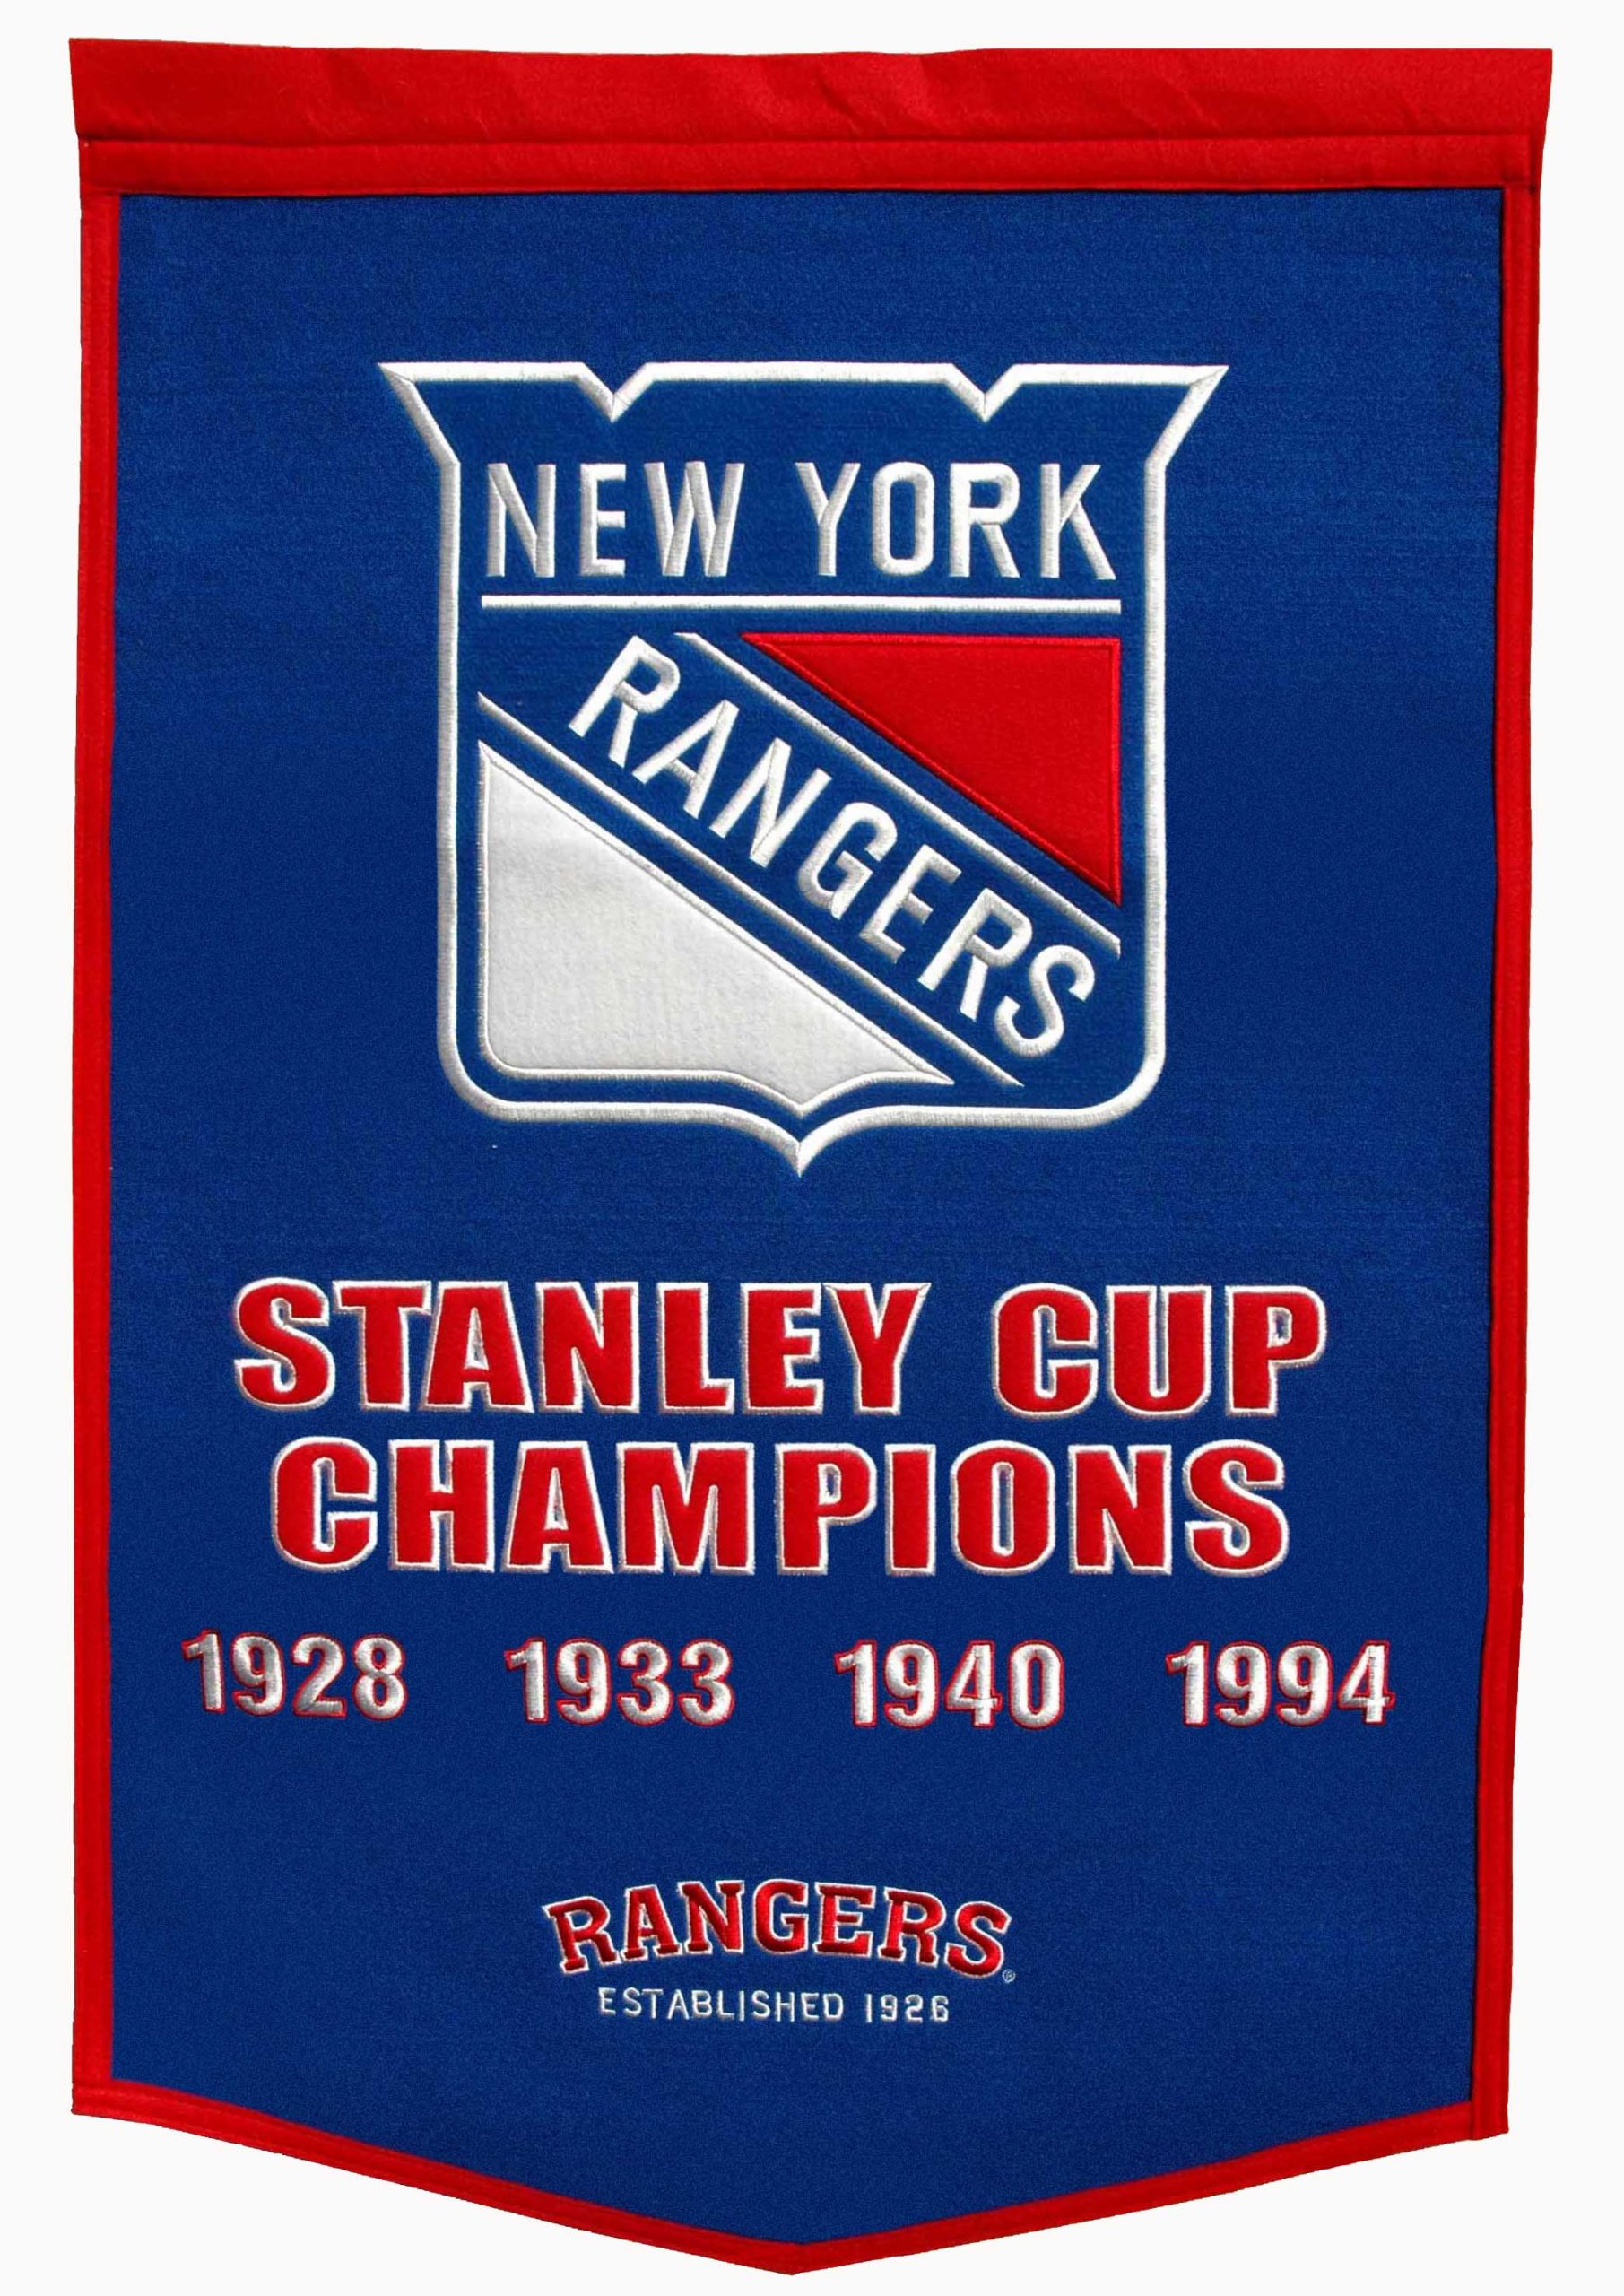 https://www.gpssportsgallery.com/wp-content/uploads/imported/new-york-rangers-dynasty-scaled.jpg